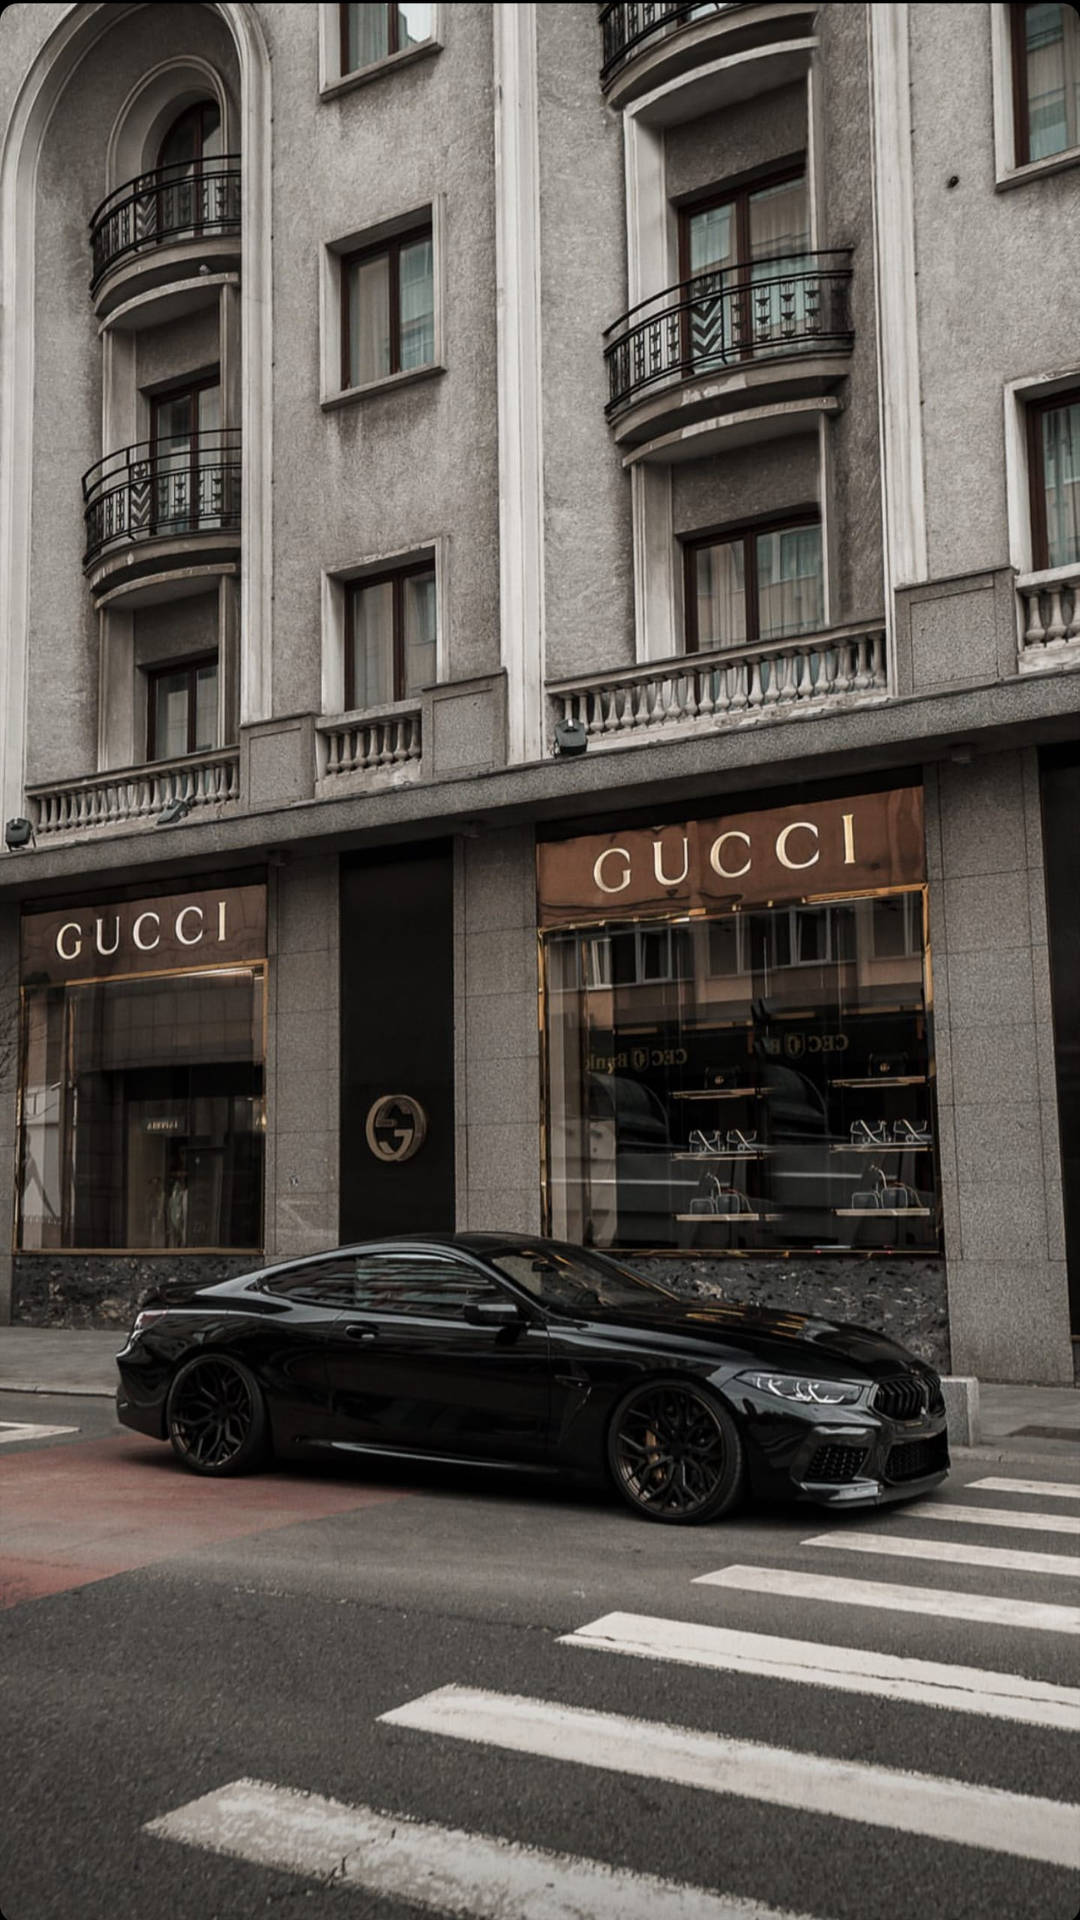 Storefront Gucci Iphone Background Wallpaper